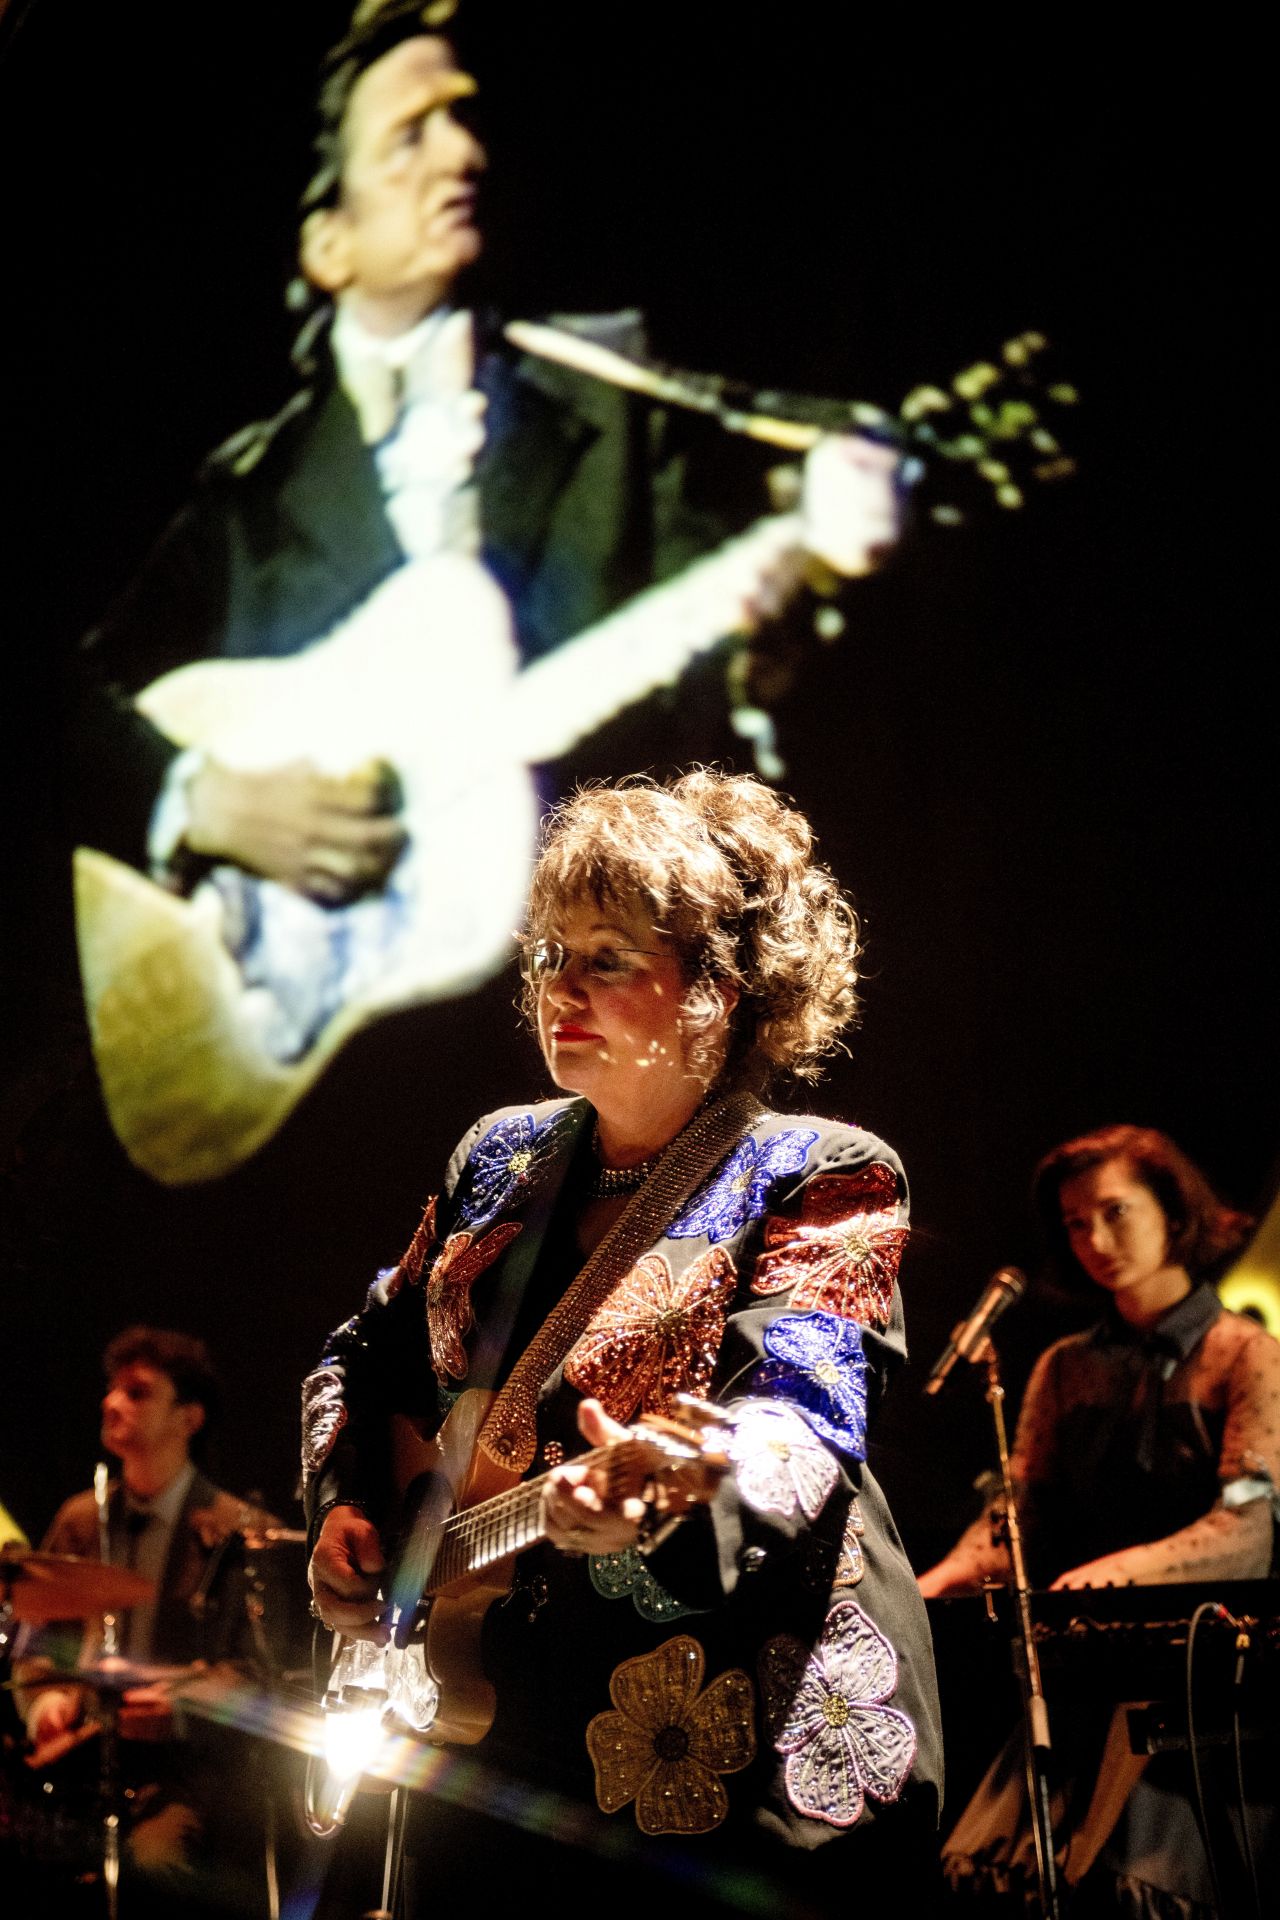 A woman wearing glasses with her hair pulled back plays a guitar on stage while archival footage of Johnny Cash shows in the background.